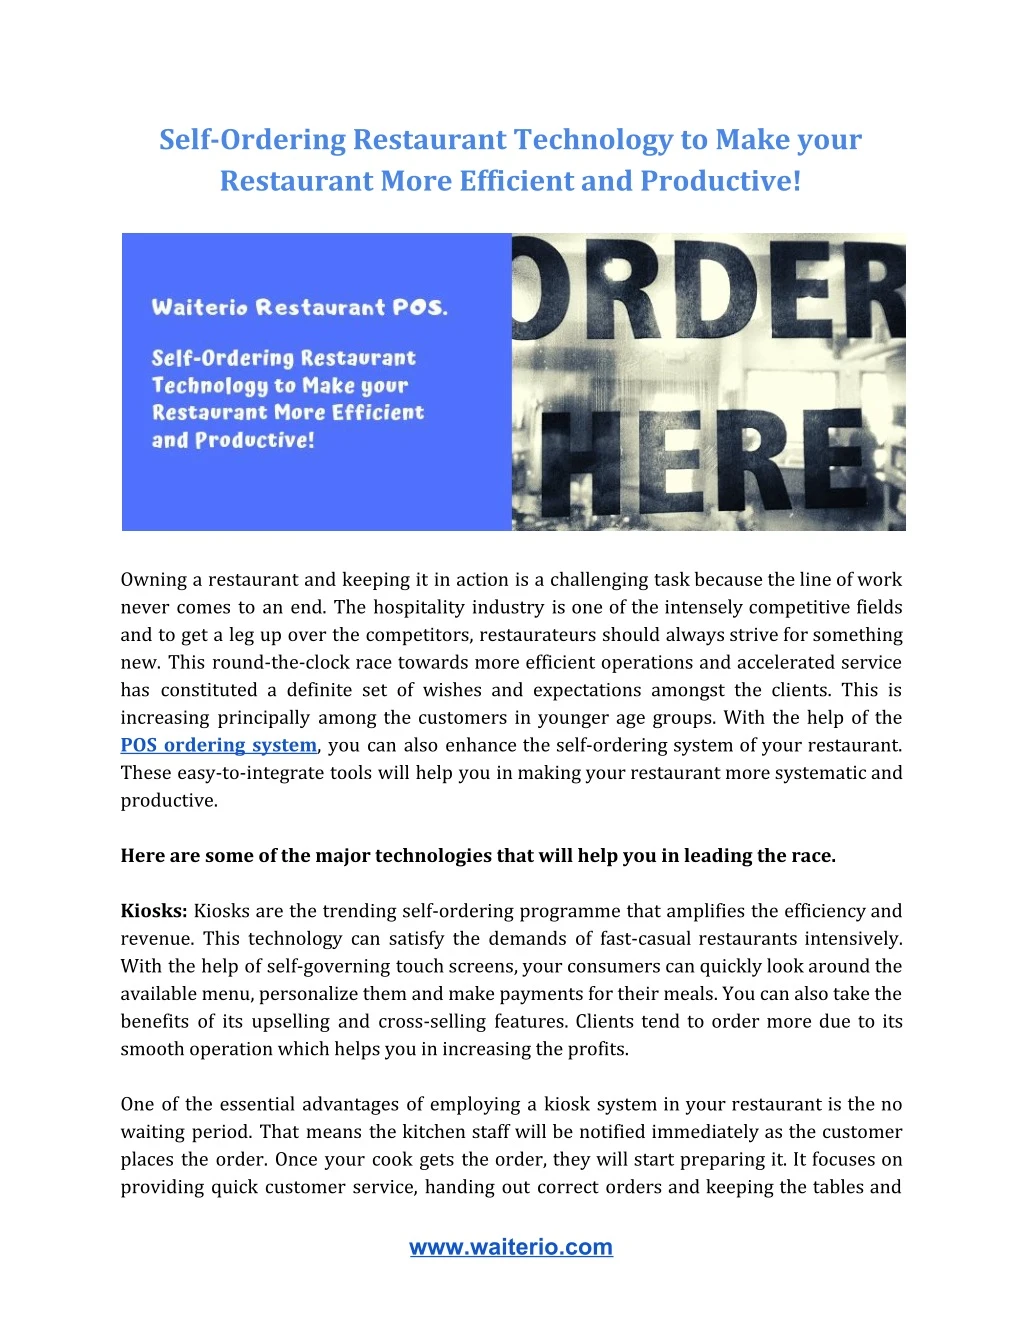 self ordering restaurant technology to make your